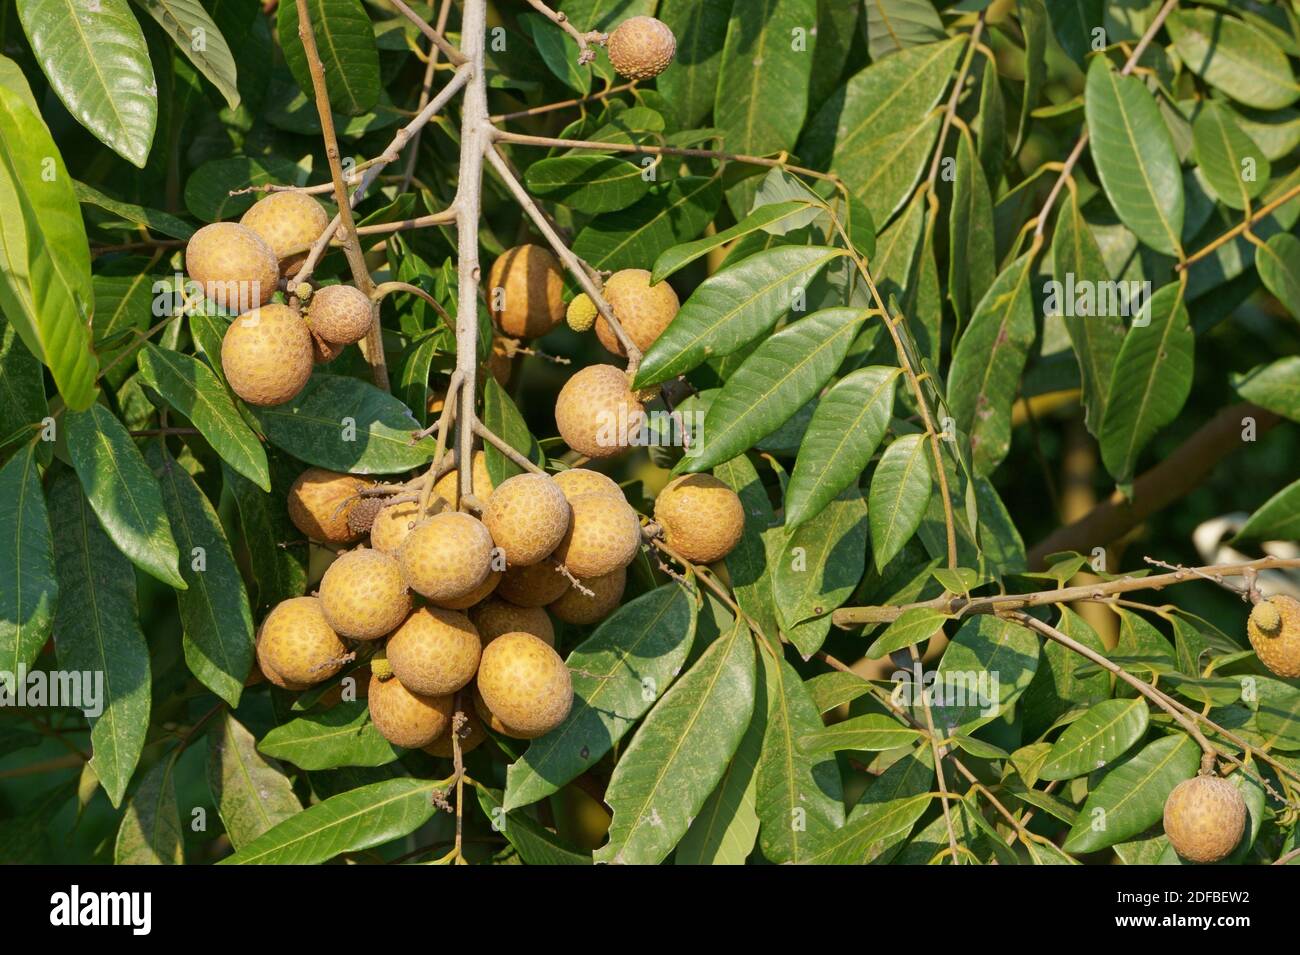 Bunch of ripe longan fruits on green leaf background Stock Photo